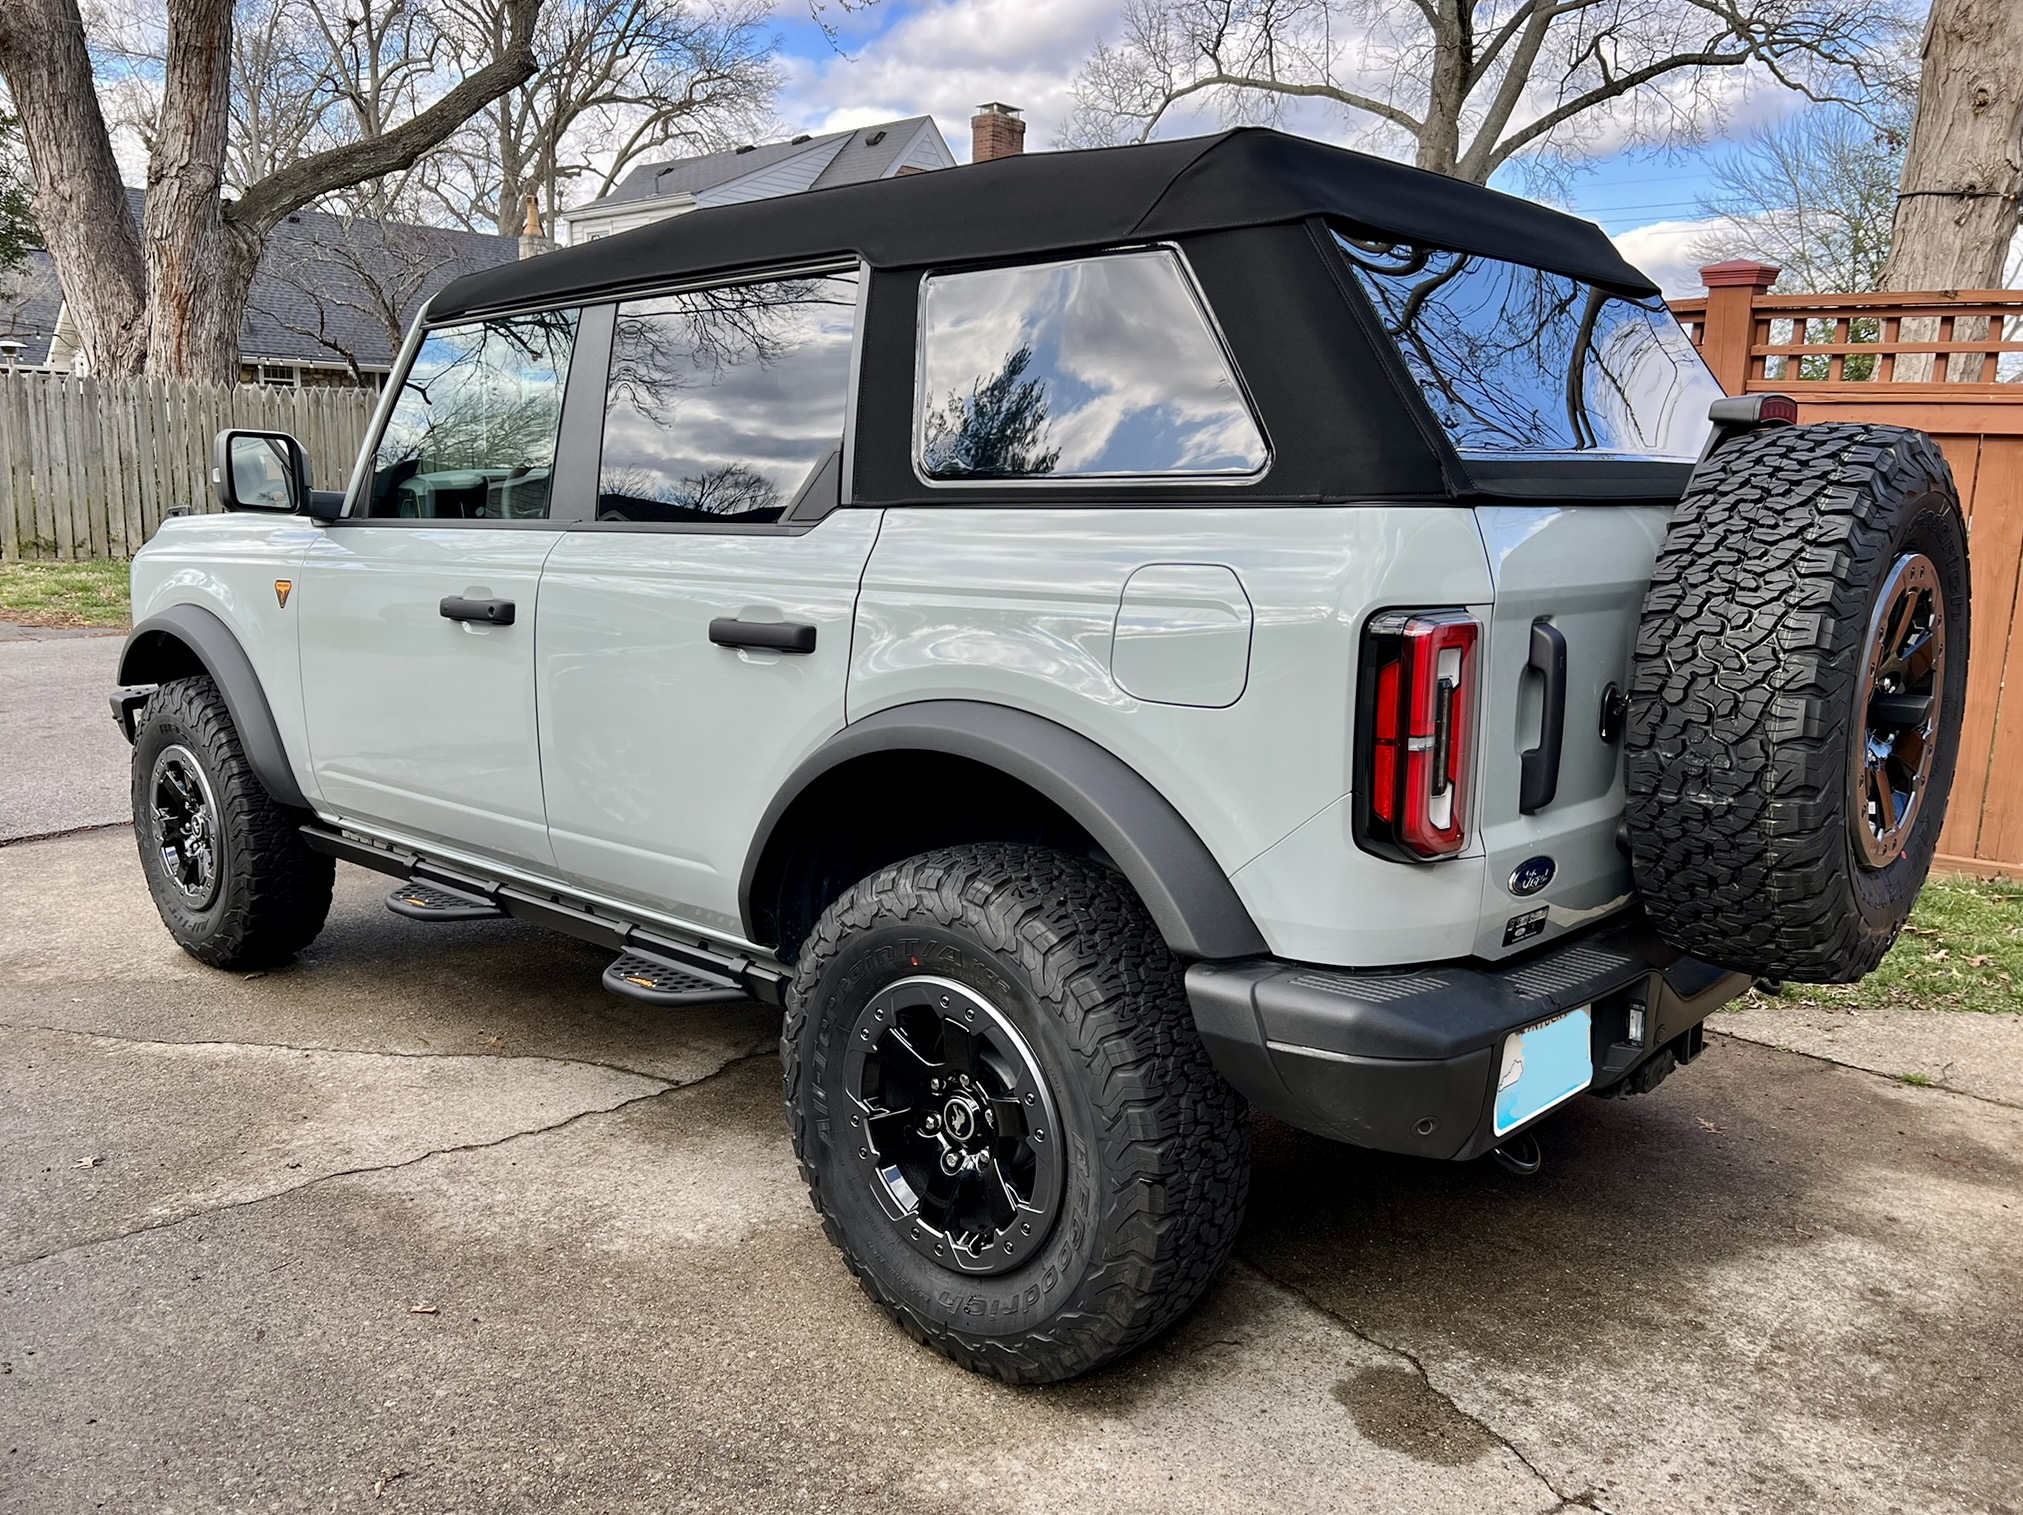 Ford Bronco New Product Release: IAG EZ-Step Add-on Kits for 2021+ Ford Bronco 3E809144-6C59-4F0F-AFC8-A95BCA505814